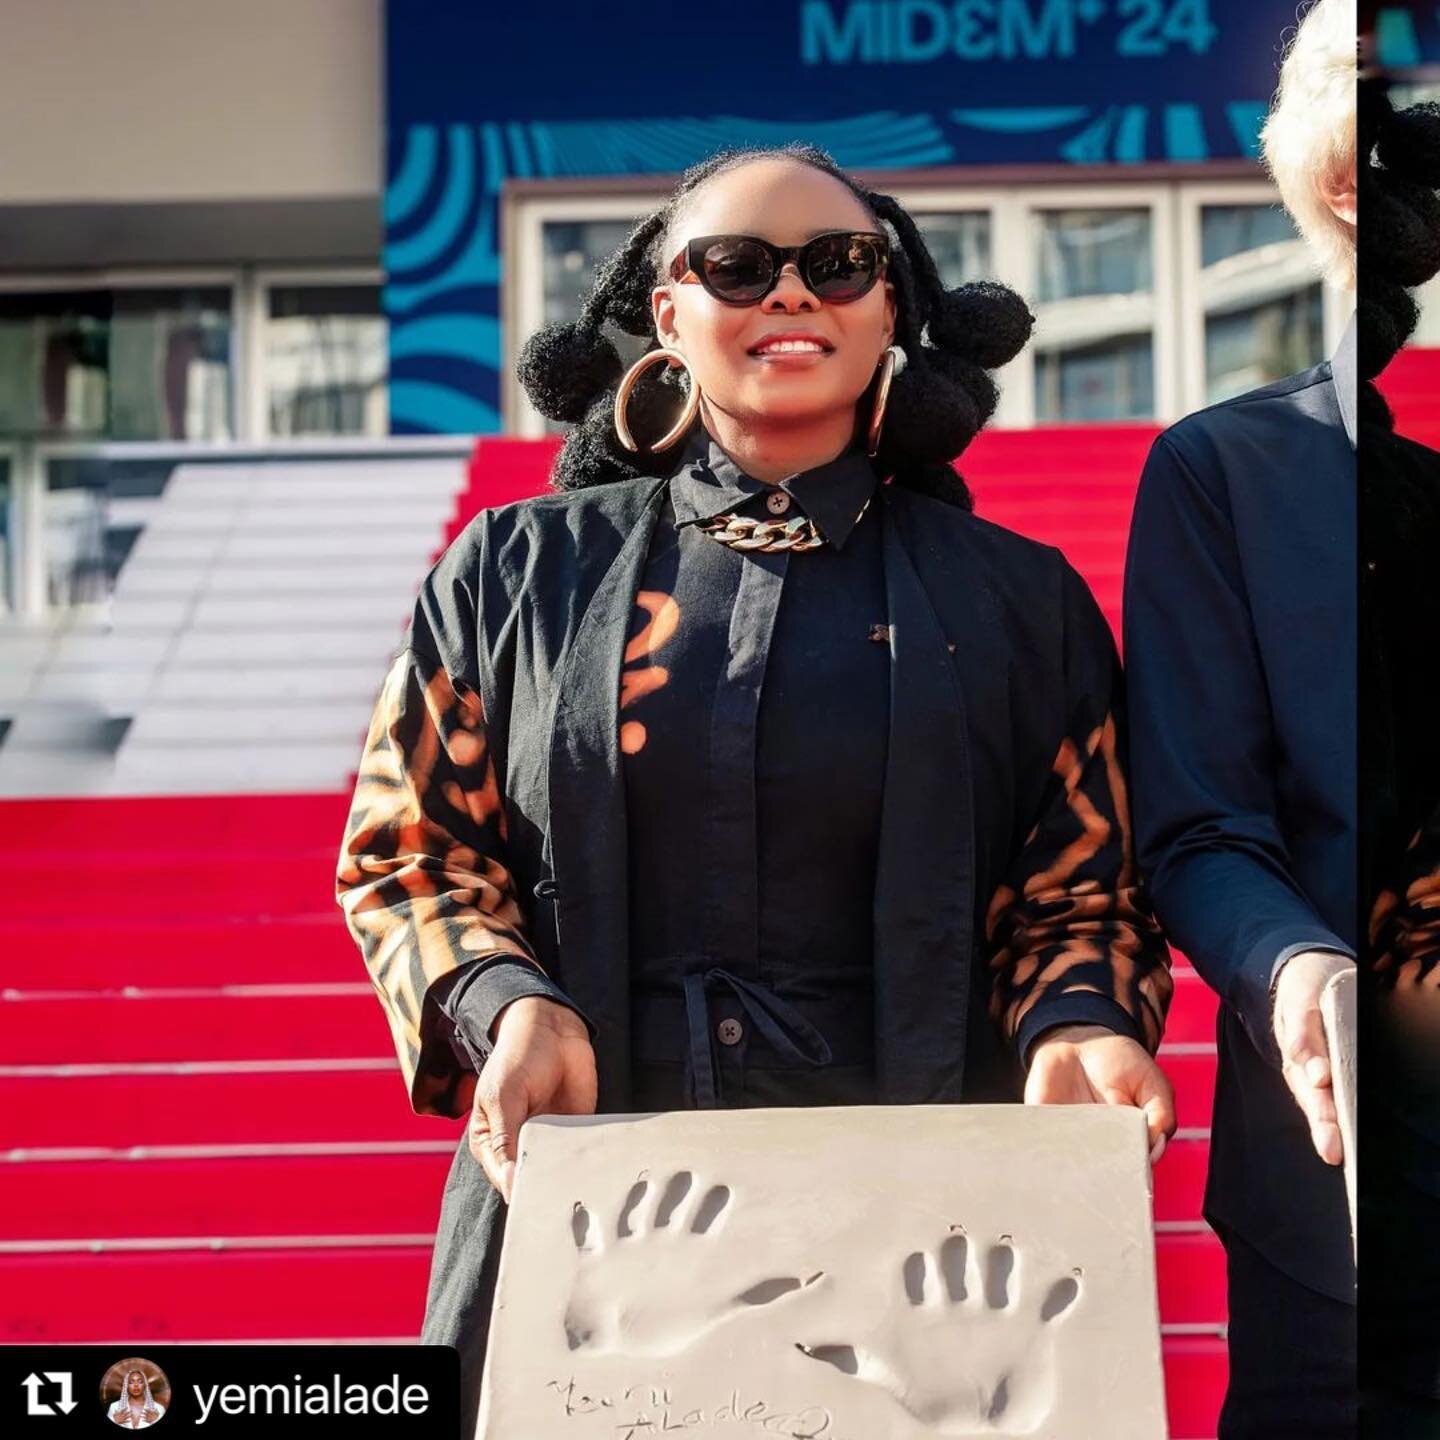 #Repost @yemialade with @use.repost
・・・
This young Legend made history in the last 24 hours as I printed my hand stamps in Cannes along side legendary Stewart Copeland and Jean Michel,to kick start #midem24 ❤️
Thank you for making me your Ambassador 